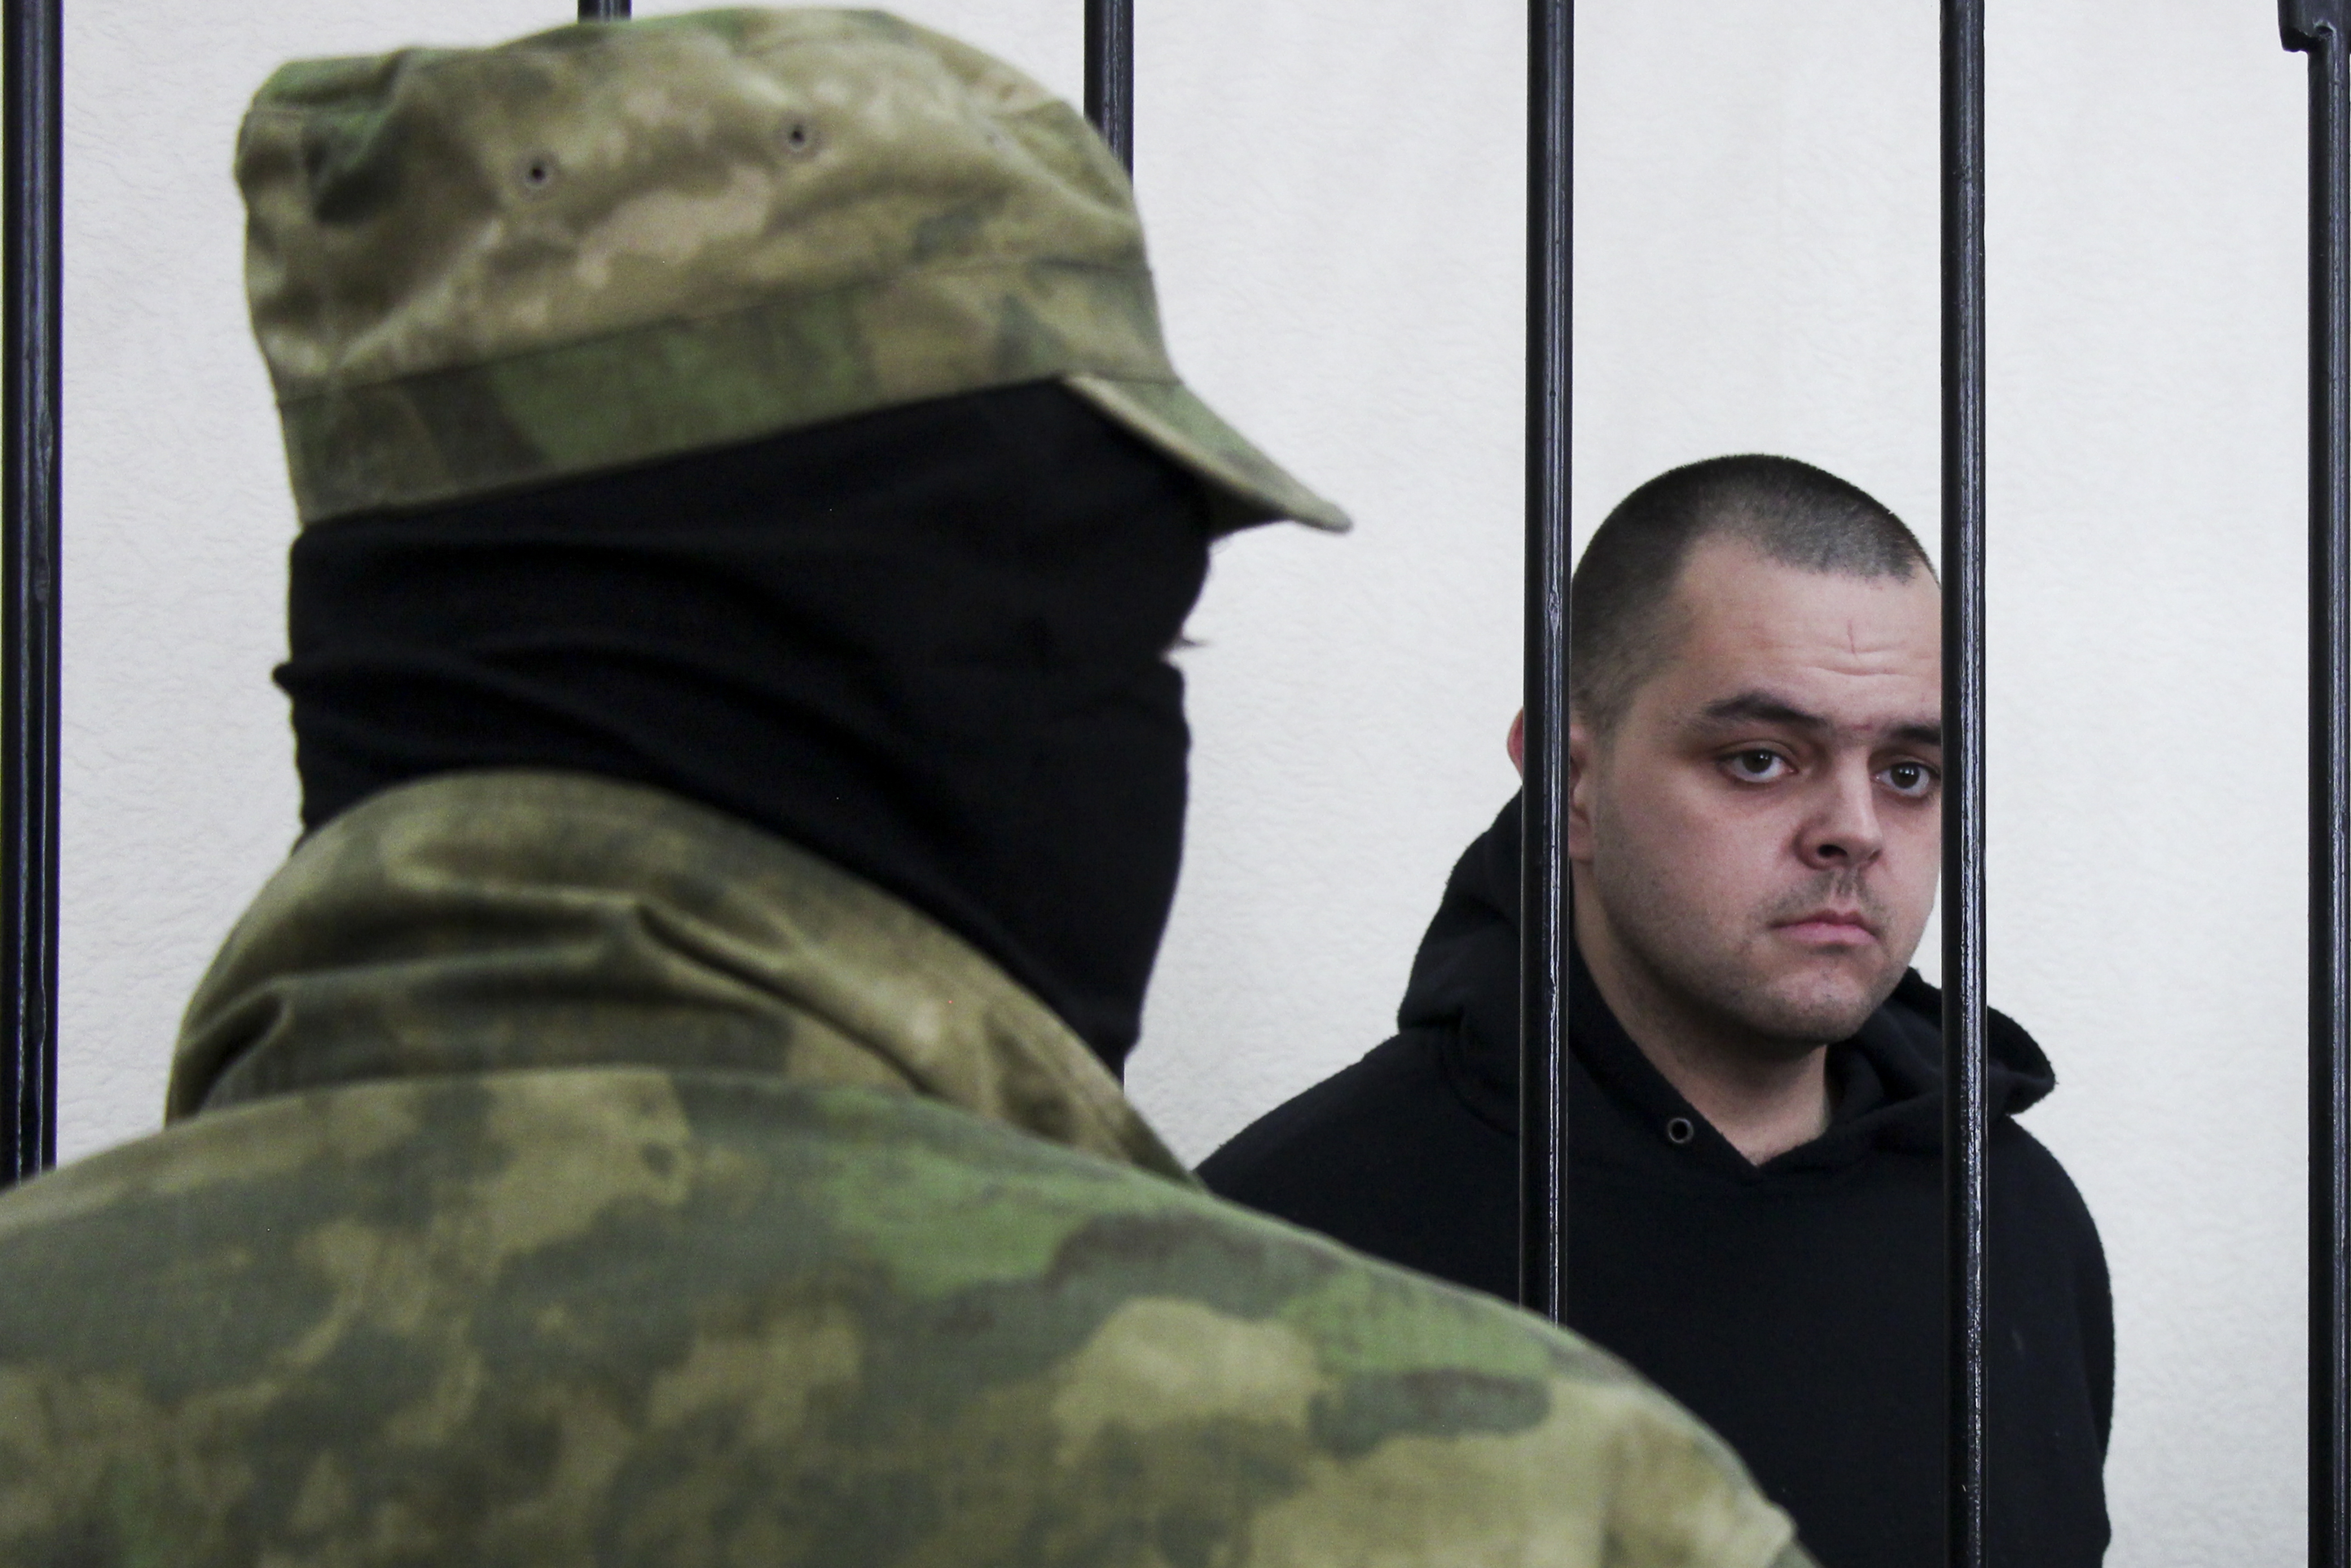 British citizen Aiden Aslin stands behind bars in a courtroom in Donetsk People's Republic (DPR) on June 9.